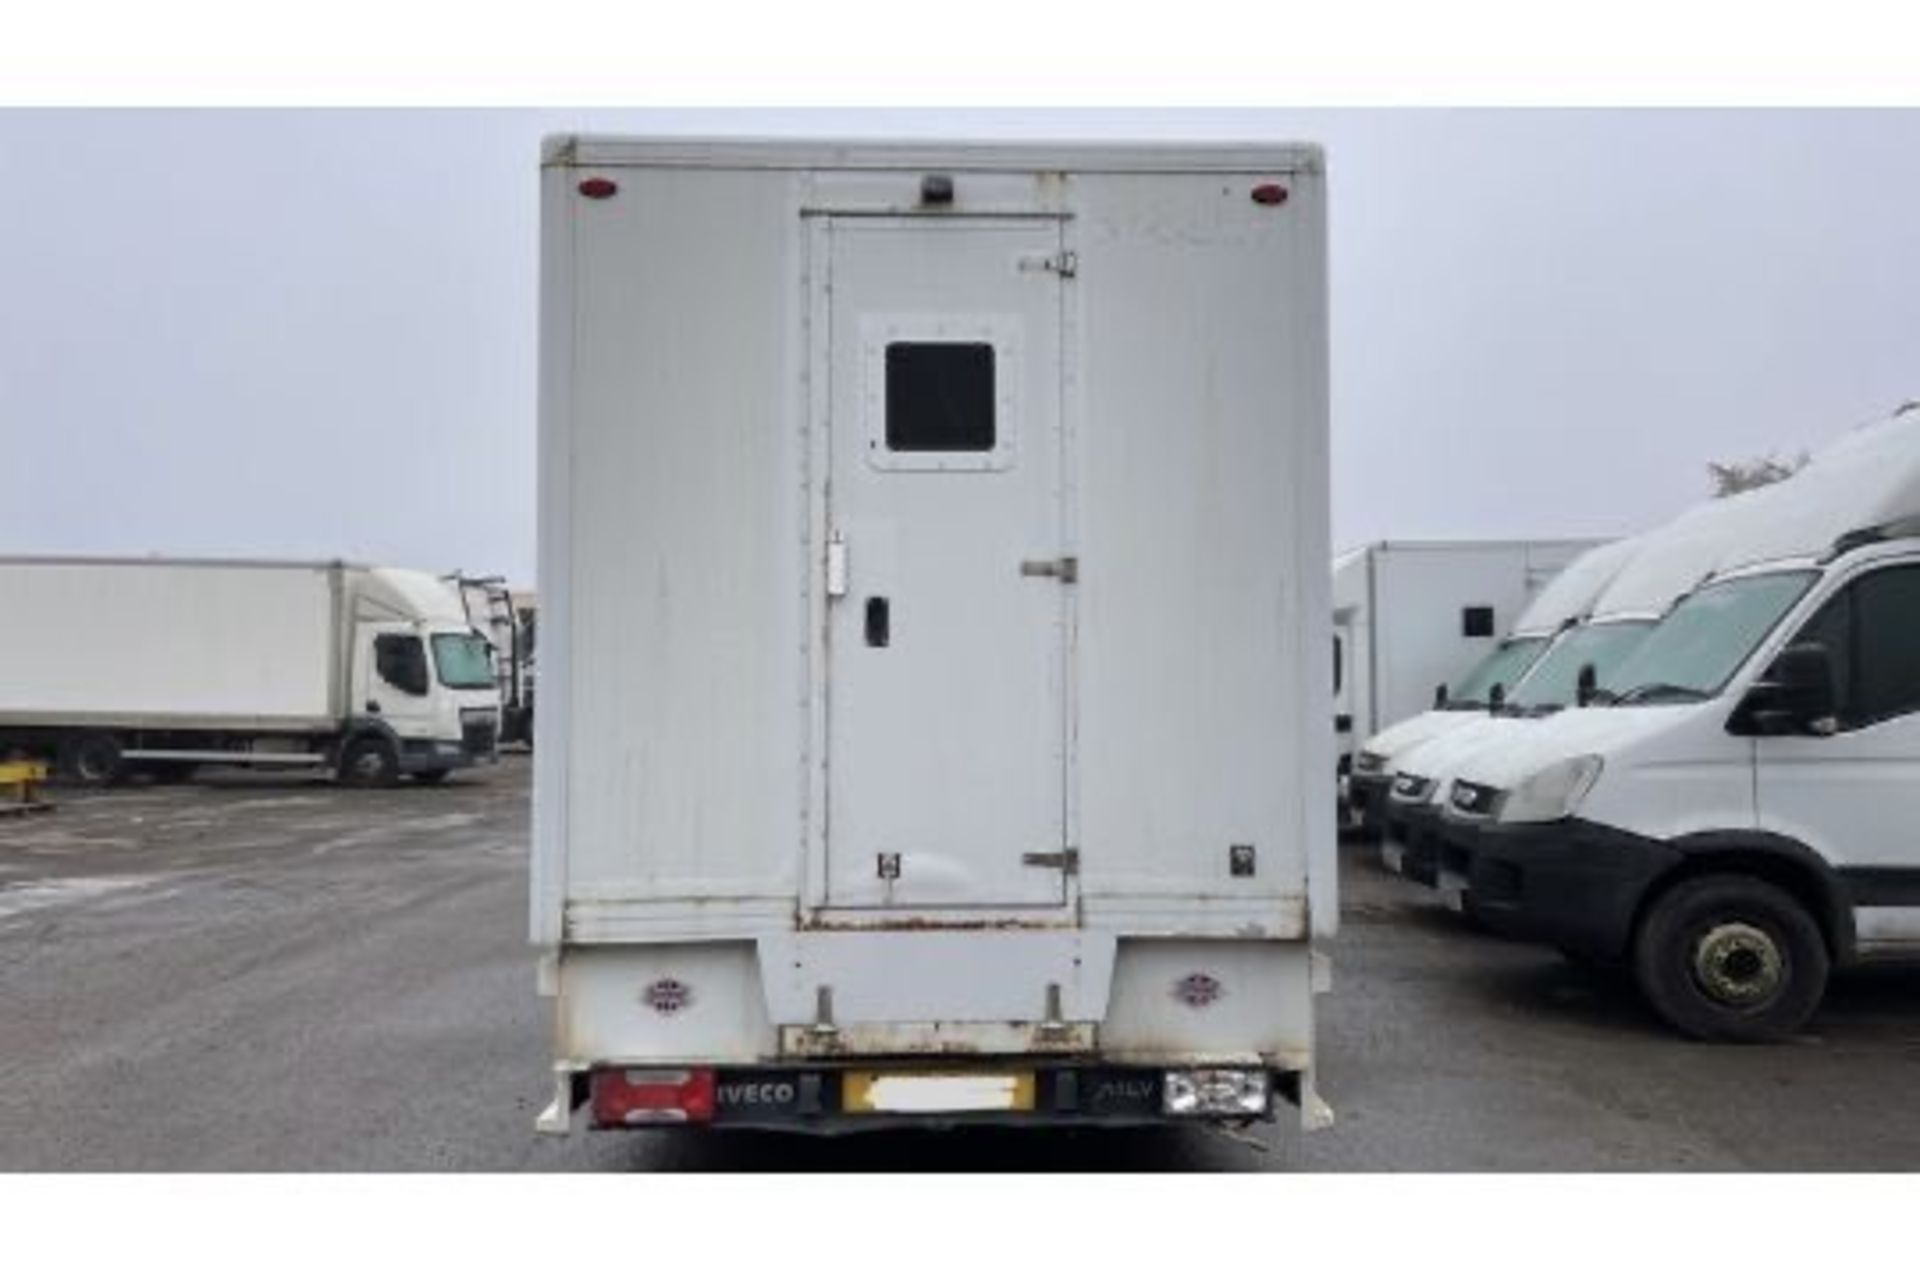 BX11 TLO. 2011 IVECO DAILY 50C14 BOX VAN. 4x2. DIESEL. MANUAL GEARBOX. E/WINDOWS & MIRROS. - Image 5 of 22